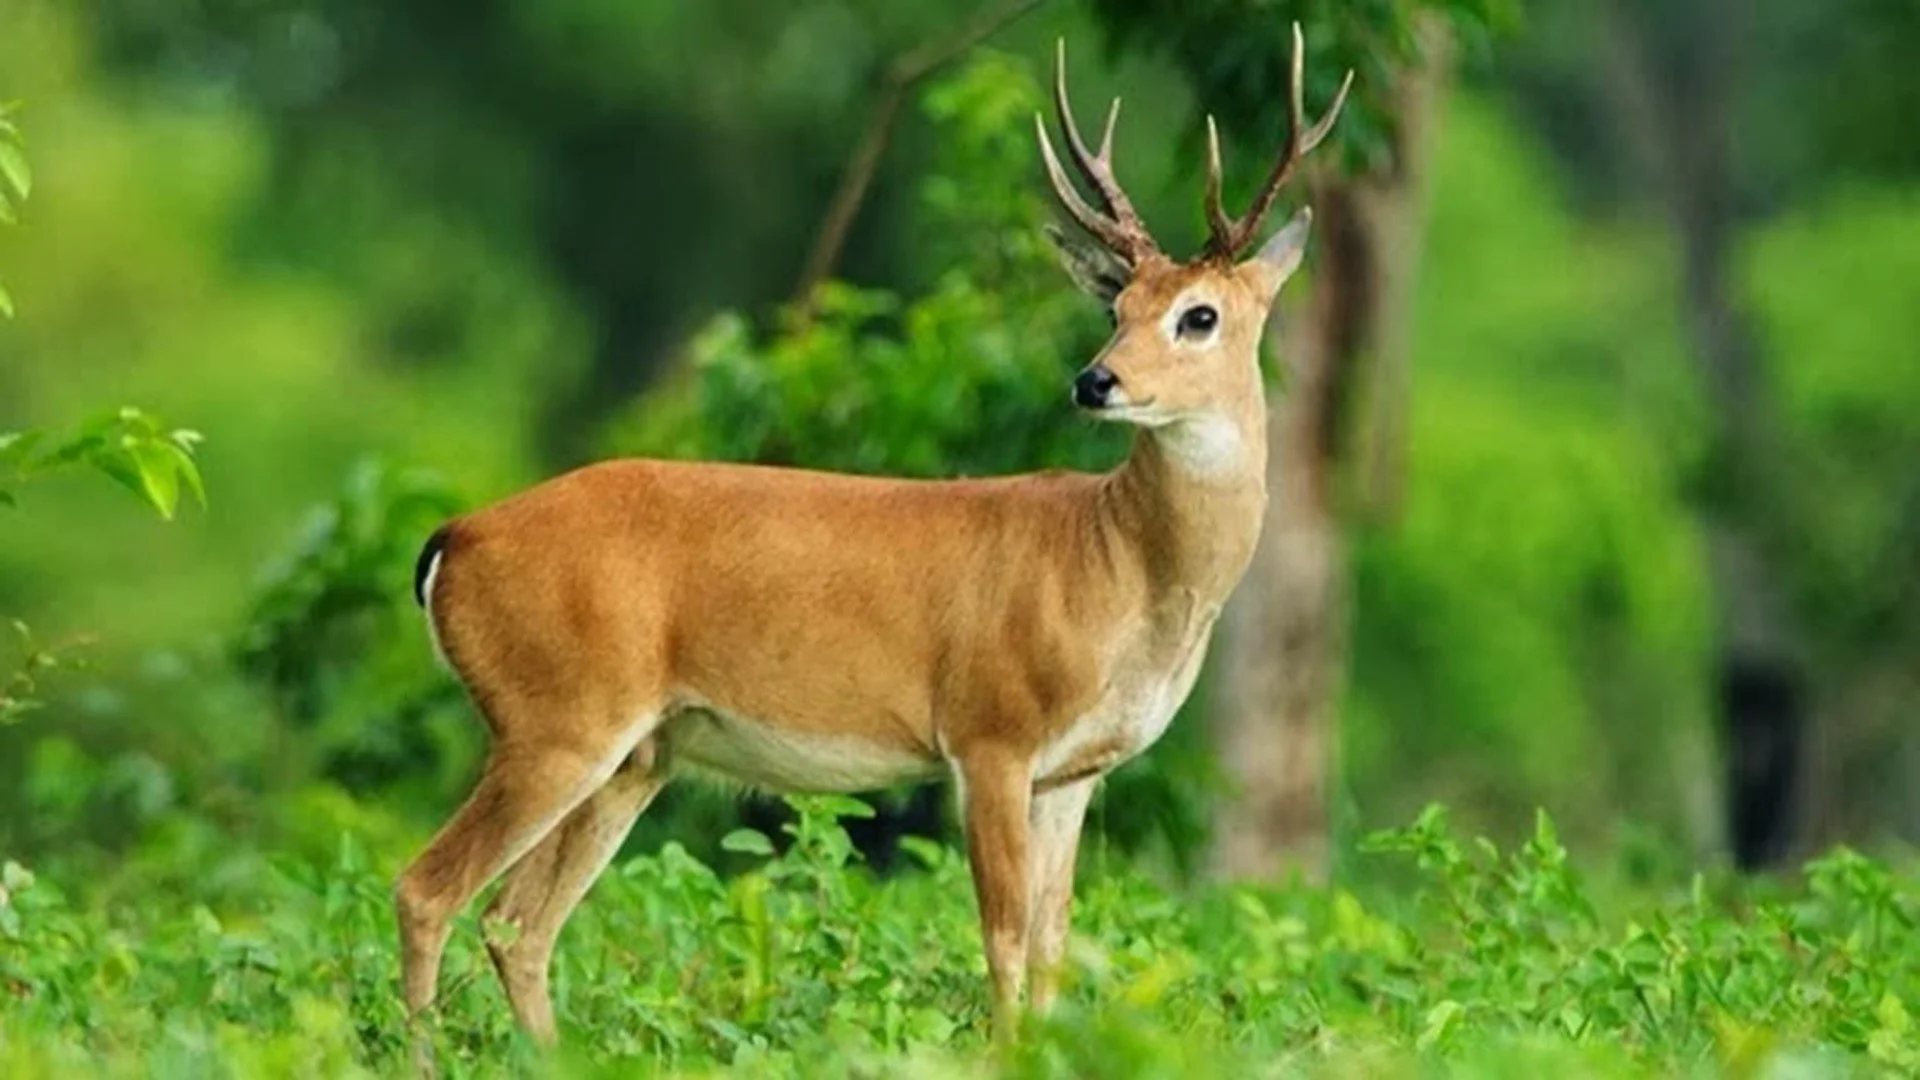 19 most deadly animals surprising some of them., # Deer – No, deer are not stabbing people with their antlers although they could